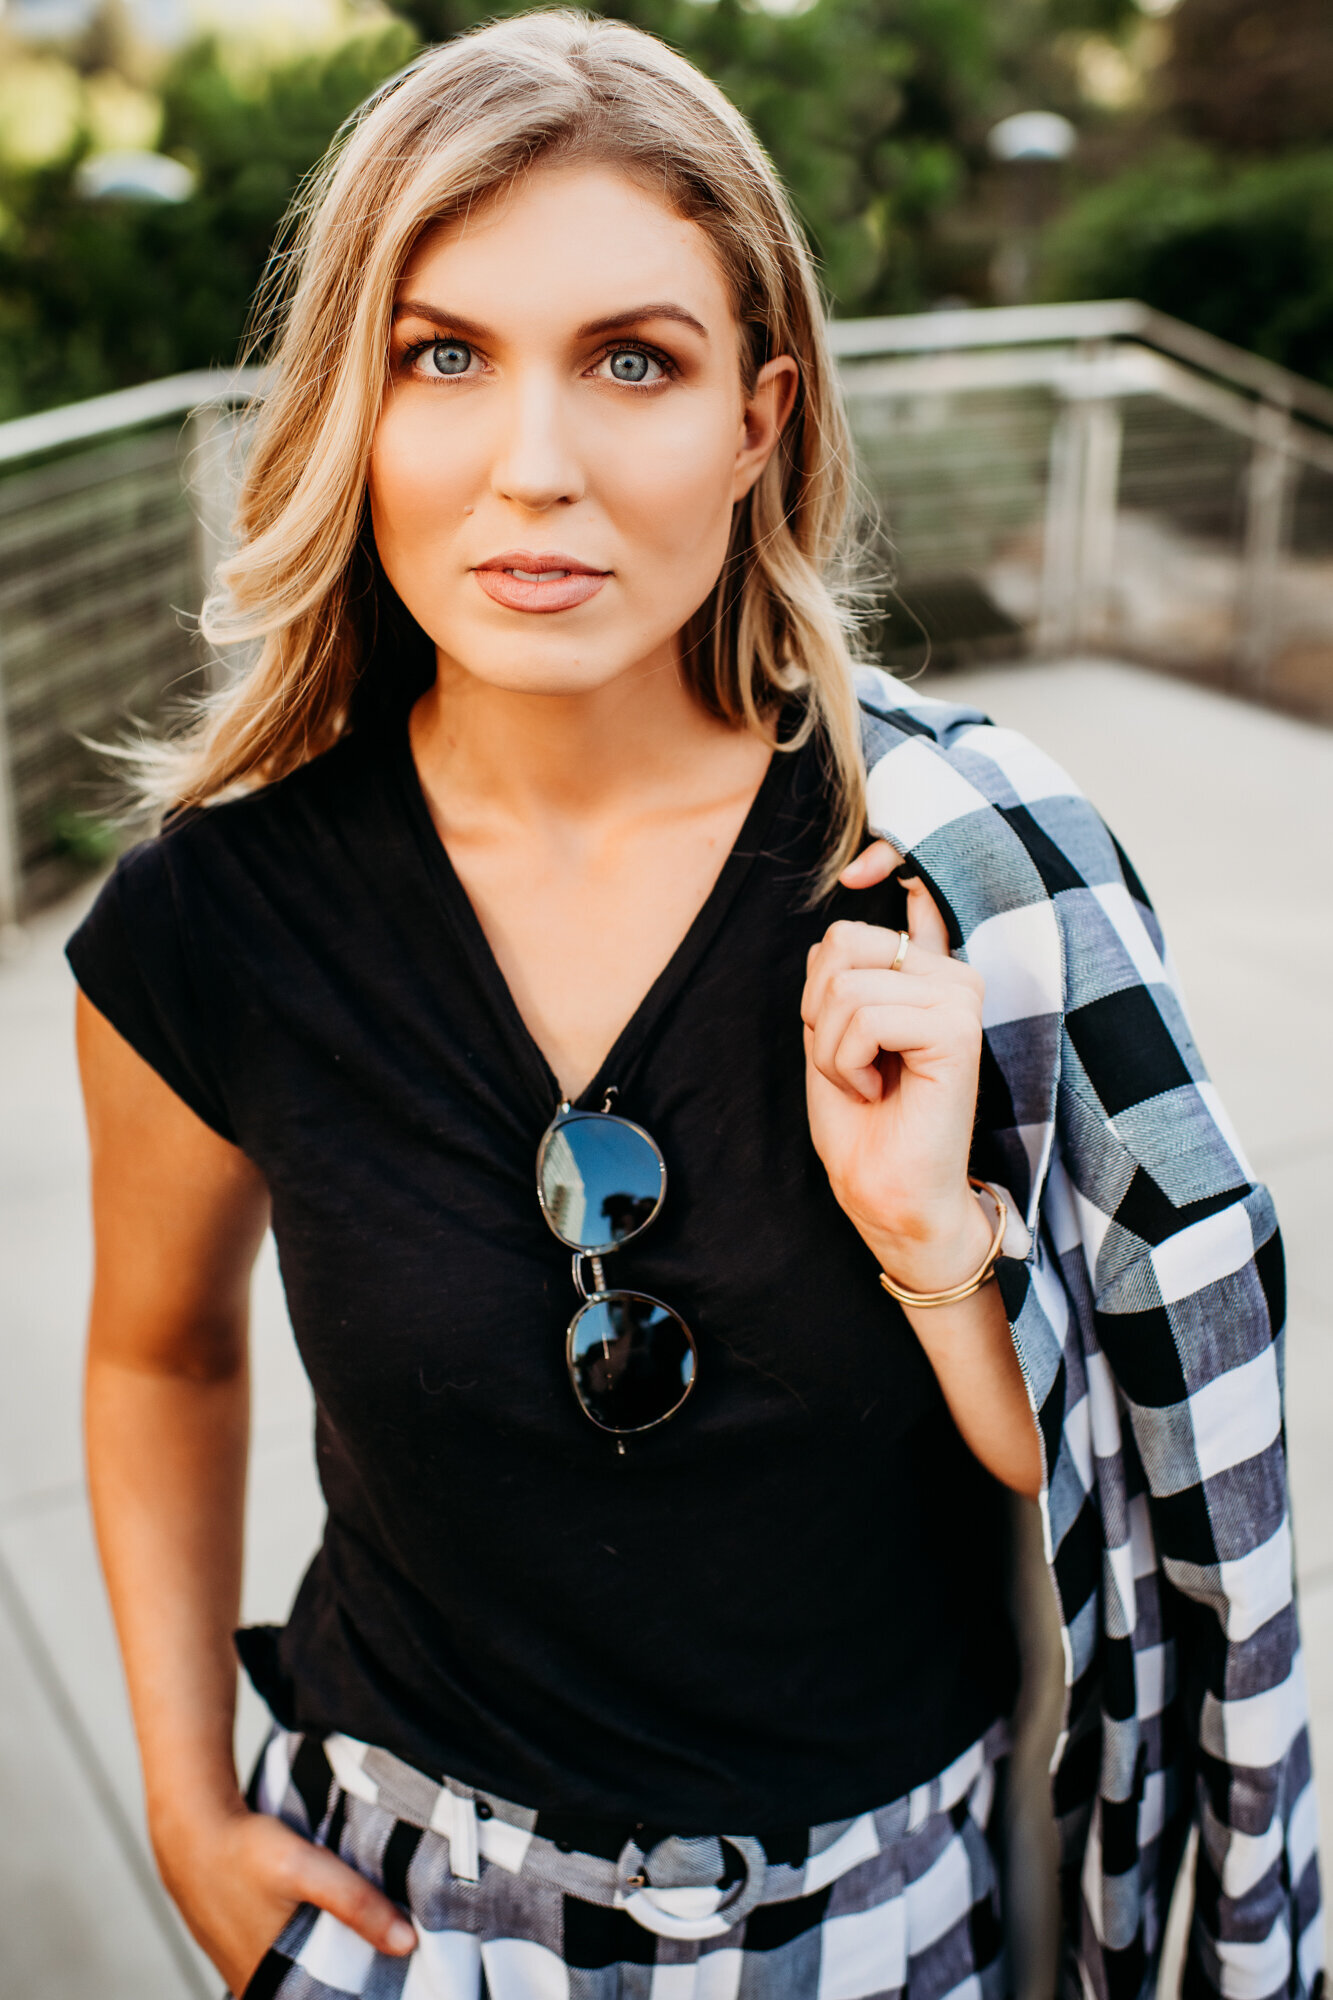 Branding Photographer, a woman wears a v-neck shirt flannel pants and holds flannel jacked outside